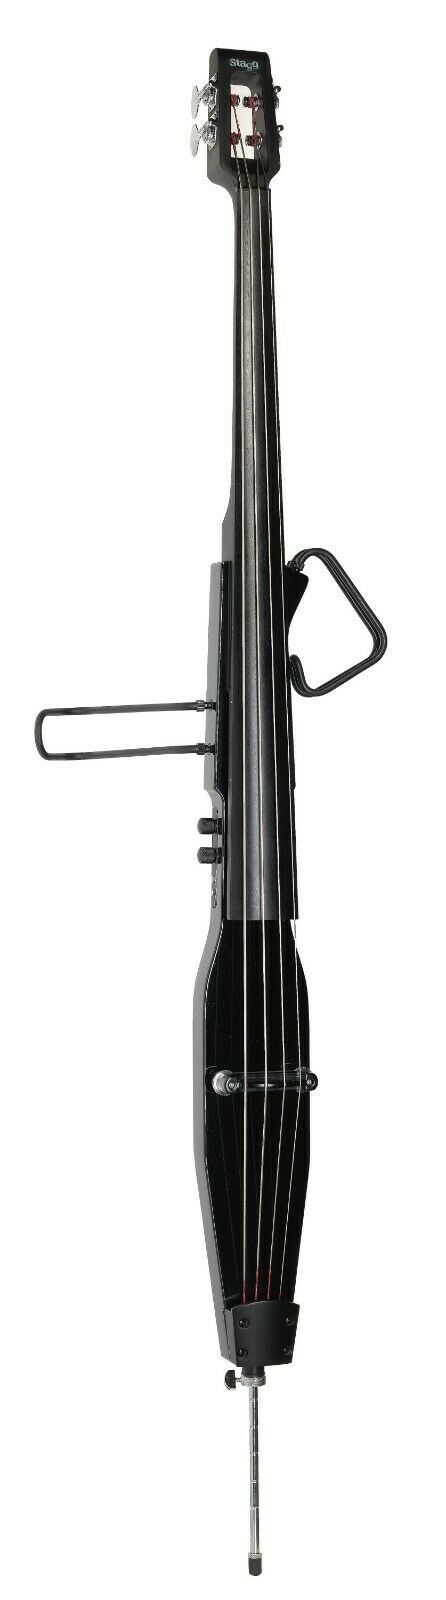 Stagg EDB-3/4 MBK Electric 3/4 Size Double Bass with Gig Bag Included